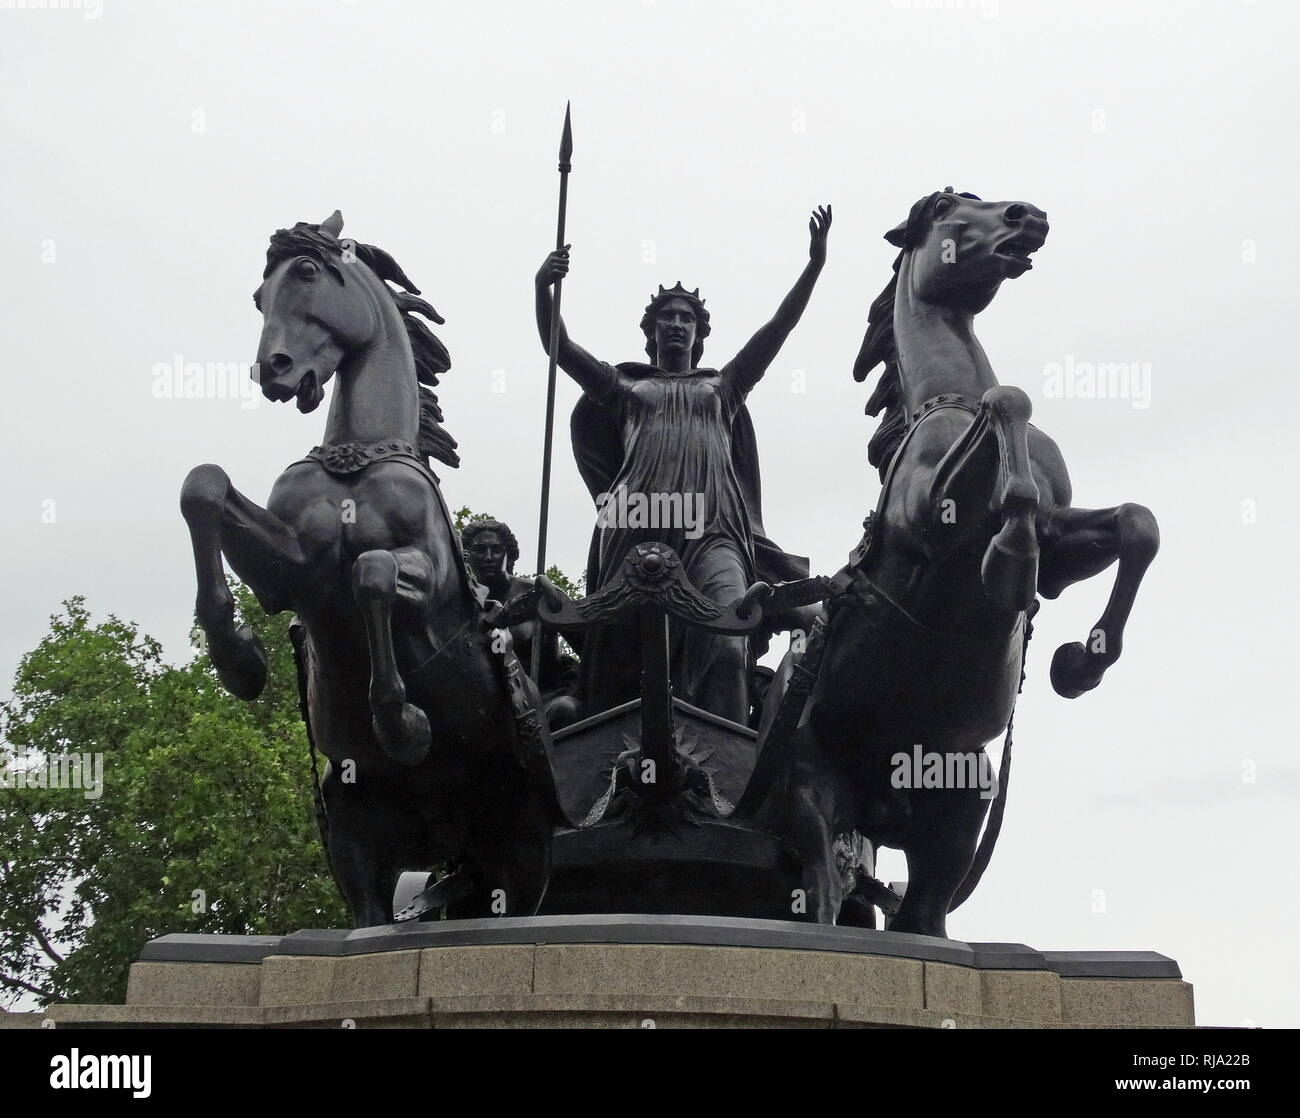 Boadicea and Her Daughters, a bronze sculptural group in London, featuring Boudicca, queen of the Celtic Iceni tribe, who led an uprising in Roman Britain. It is located at Westminster Bridge, London. By English artist and engineer Thomas Thorneycroft. Stock Photo